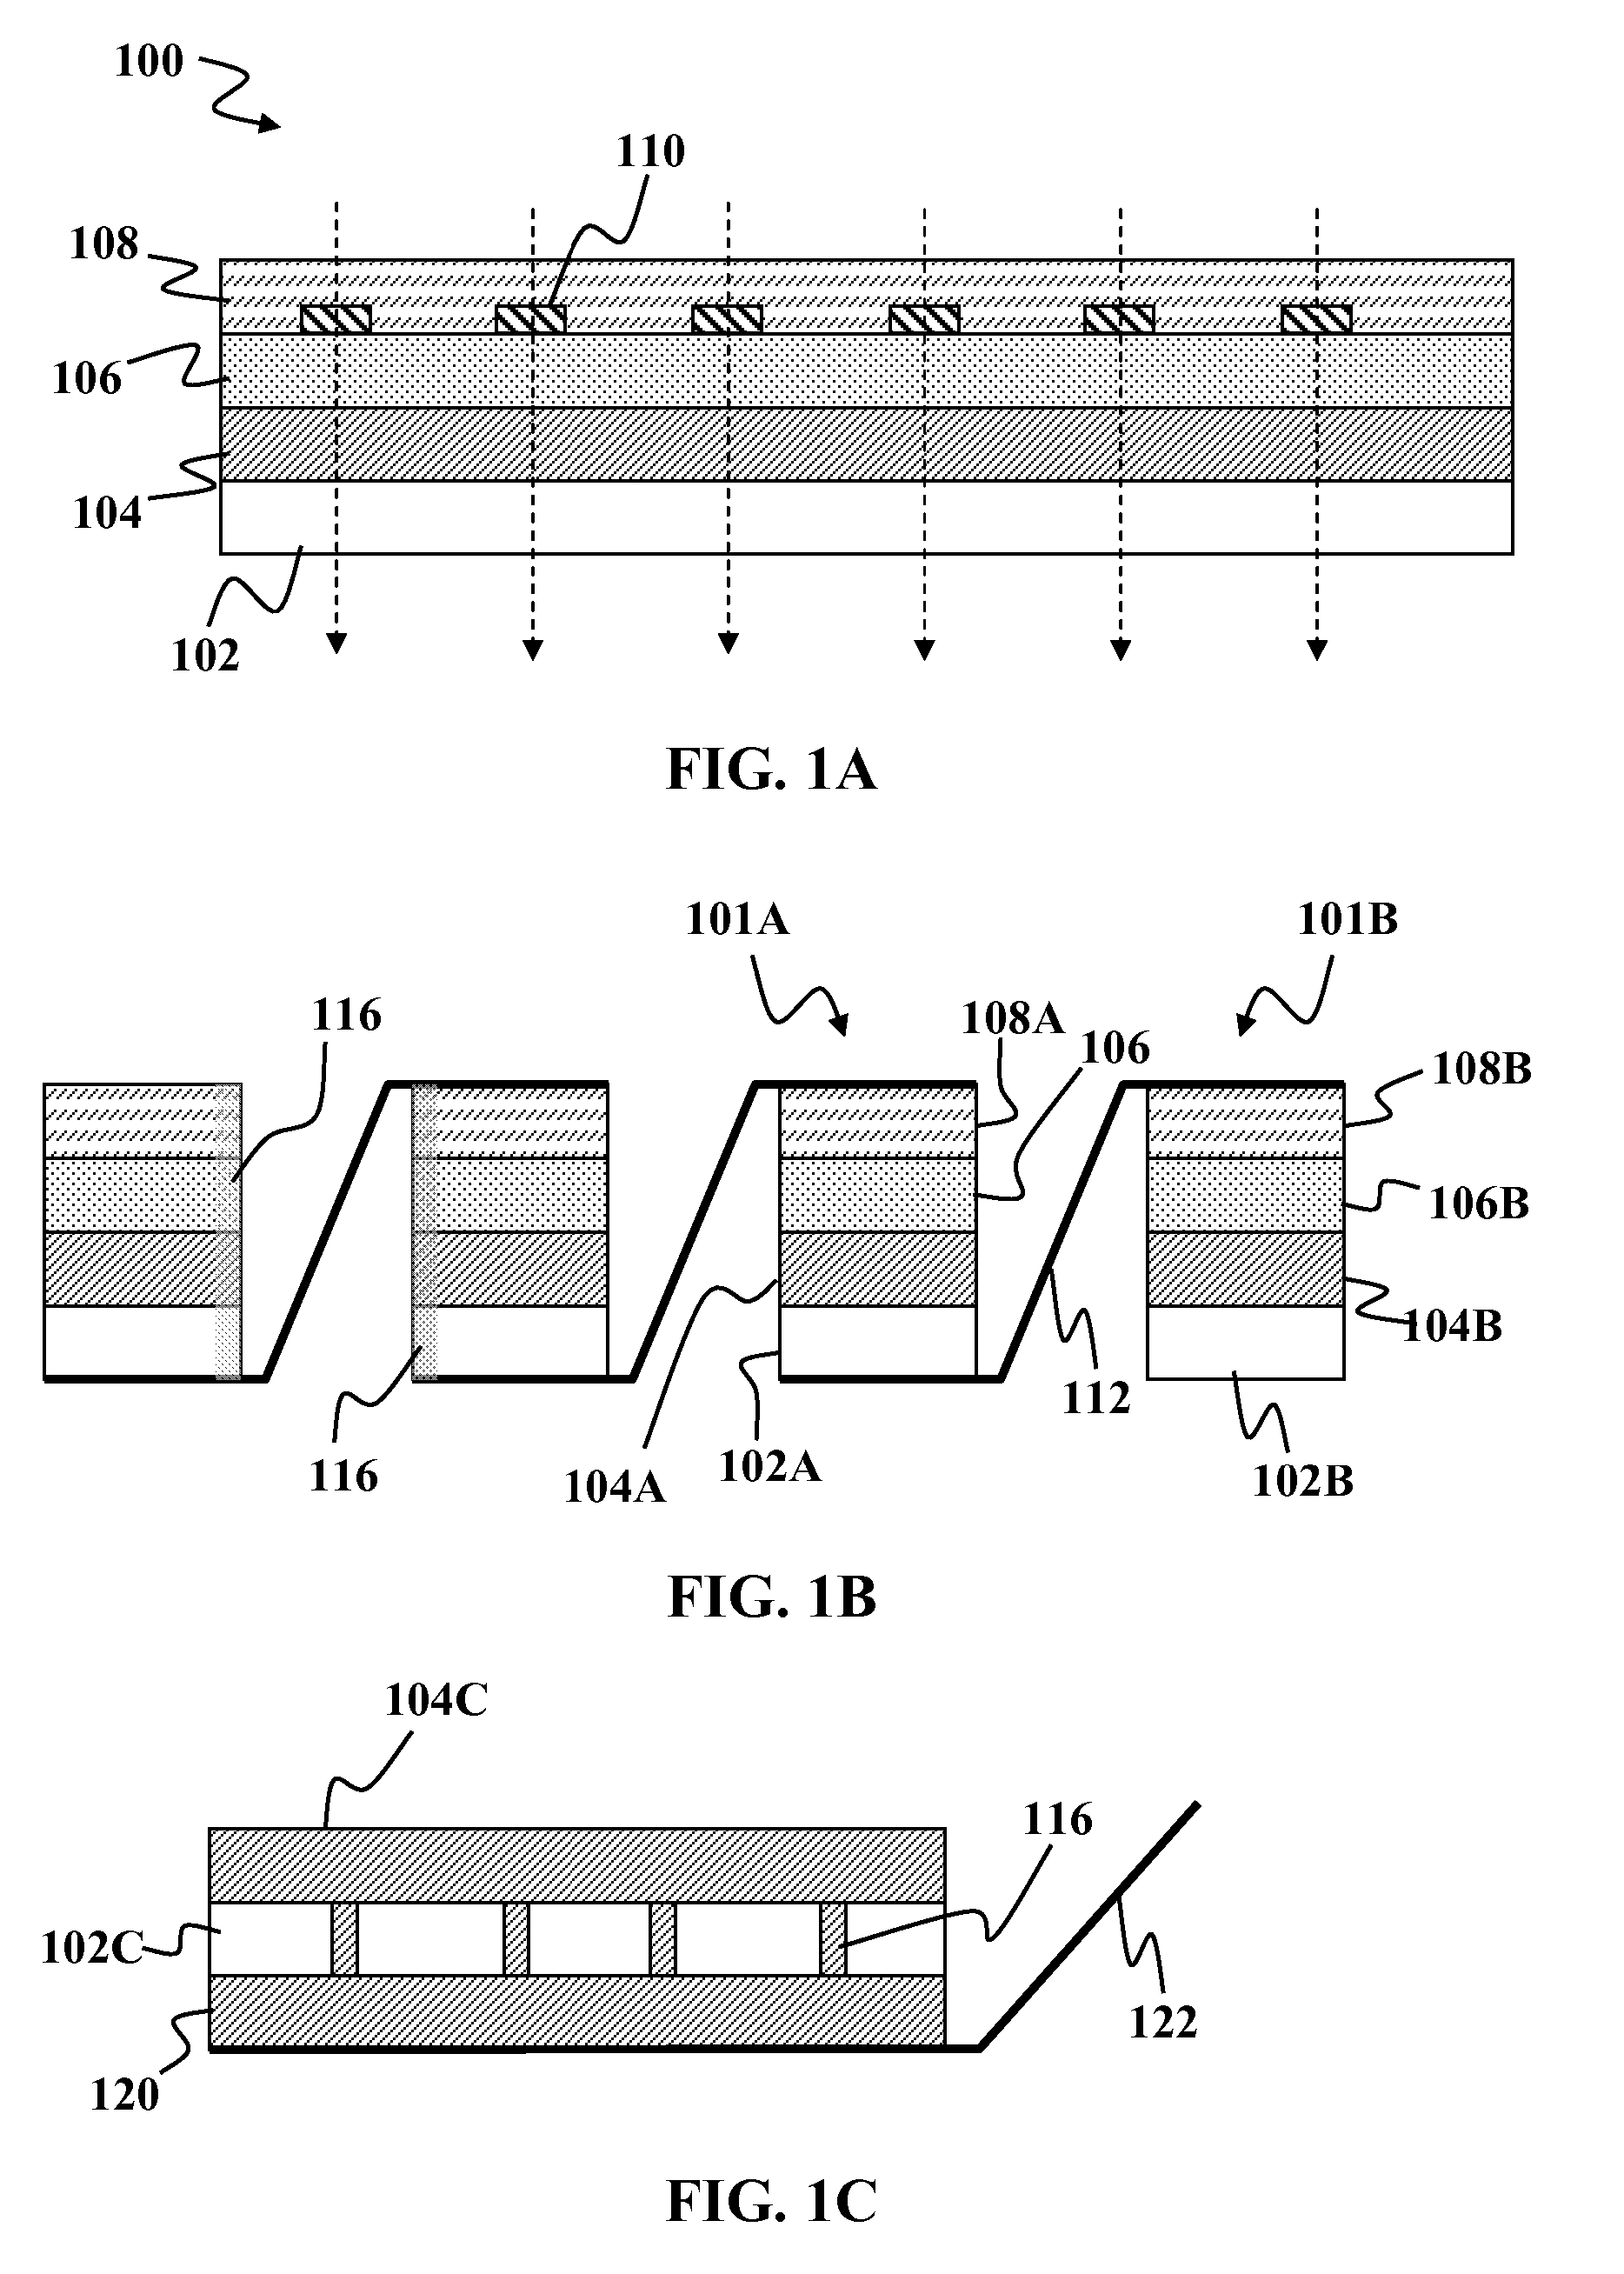 Manufacturing of optoelectronic devices